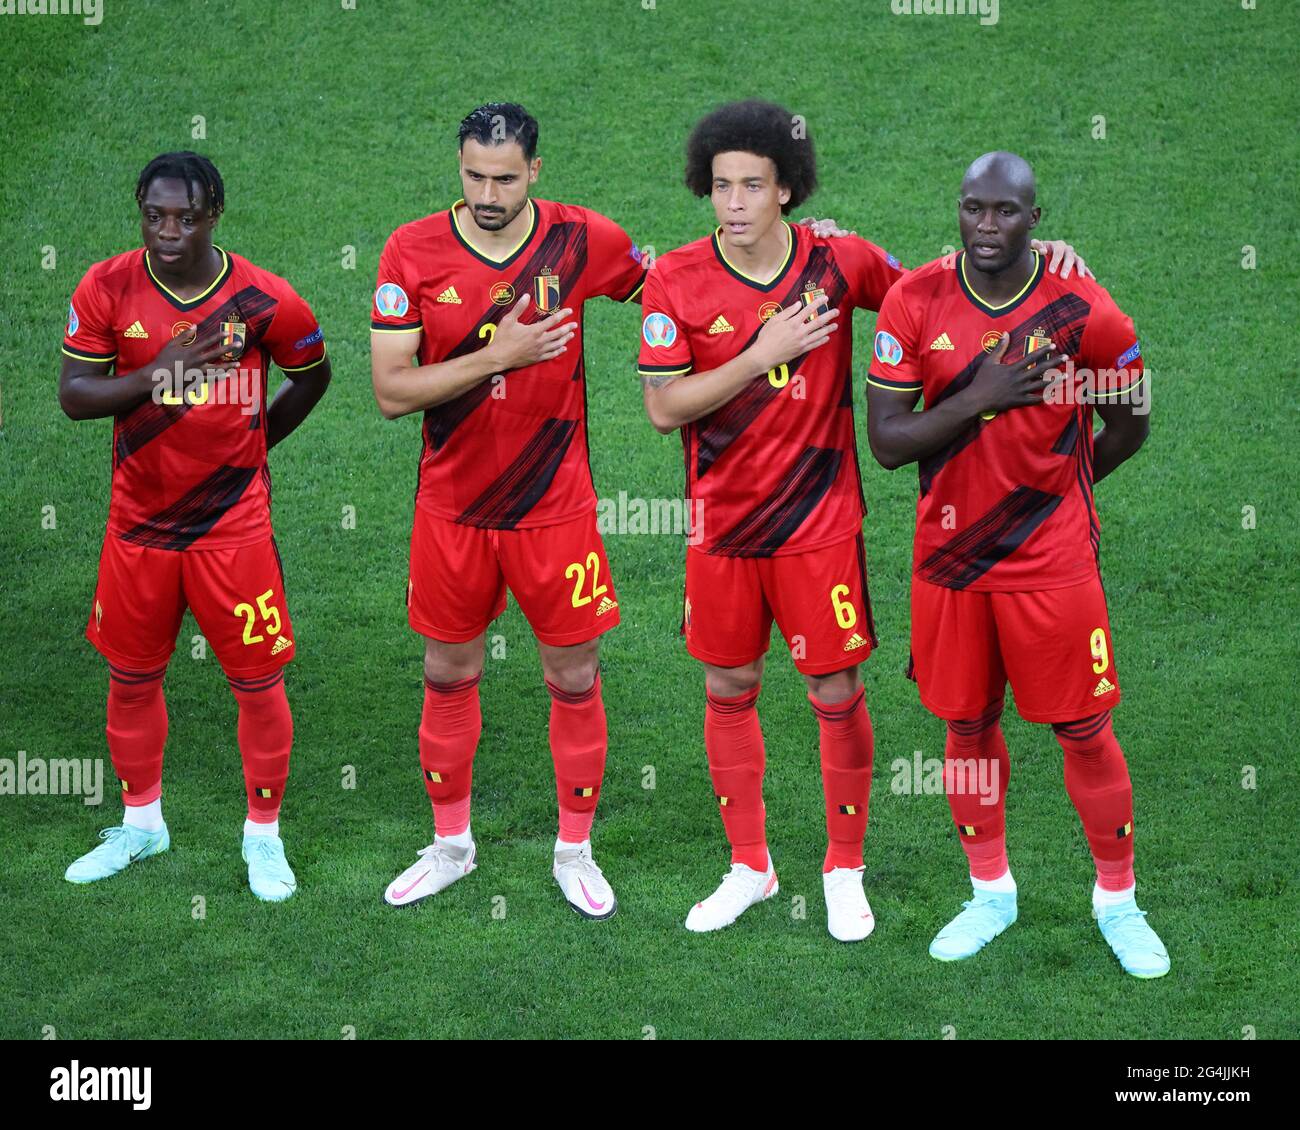 Saint Petersburg, Russia. 21st June, 2021. Jeremy Doku (25), Nacer Chadli (22), Axel Witsel (6) and Romelu Lukaku (9) of Belgium are seen during the European championship EURO 2020 between Belgium and Finland at Gazprom Arena.(Final Score; Finland 0:2 Belgium). Credit: SOPA Images Limited/Alamy Live News Stock Photo